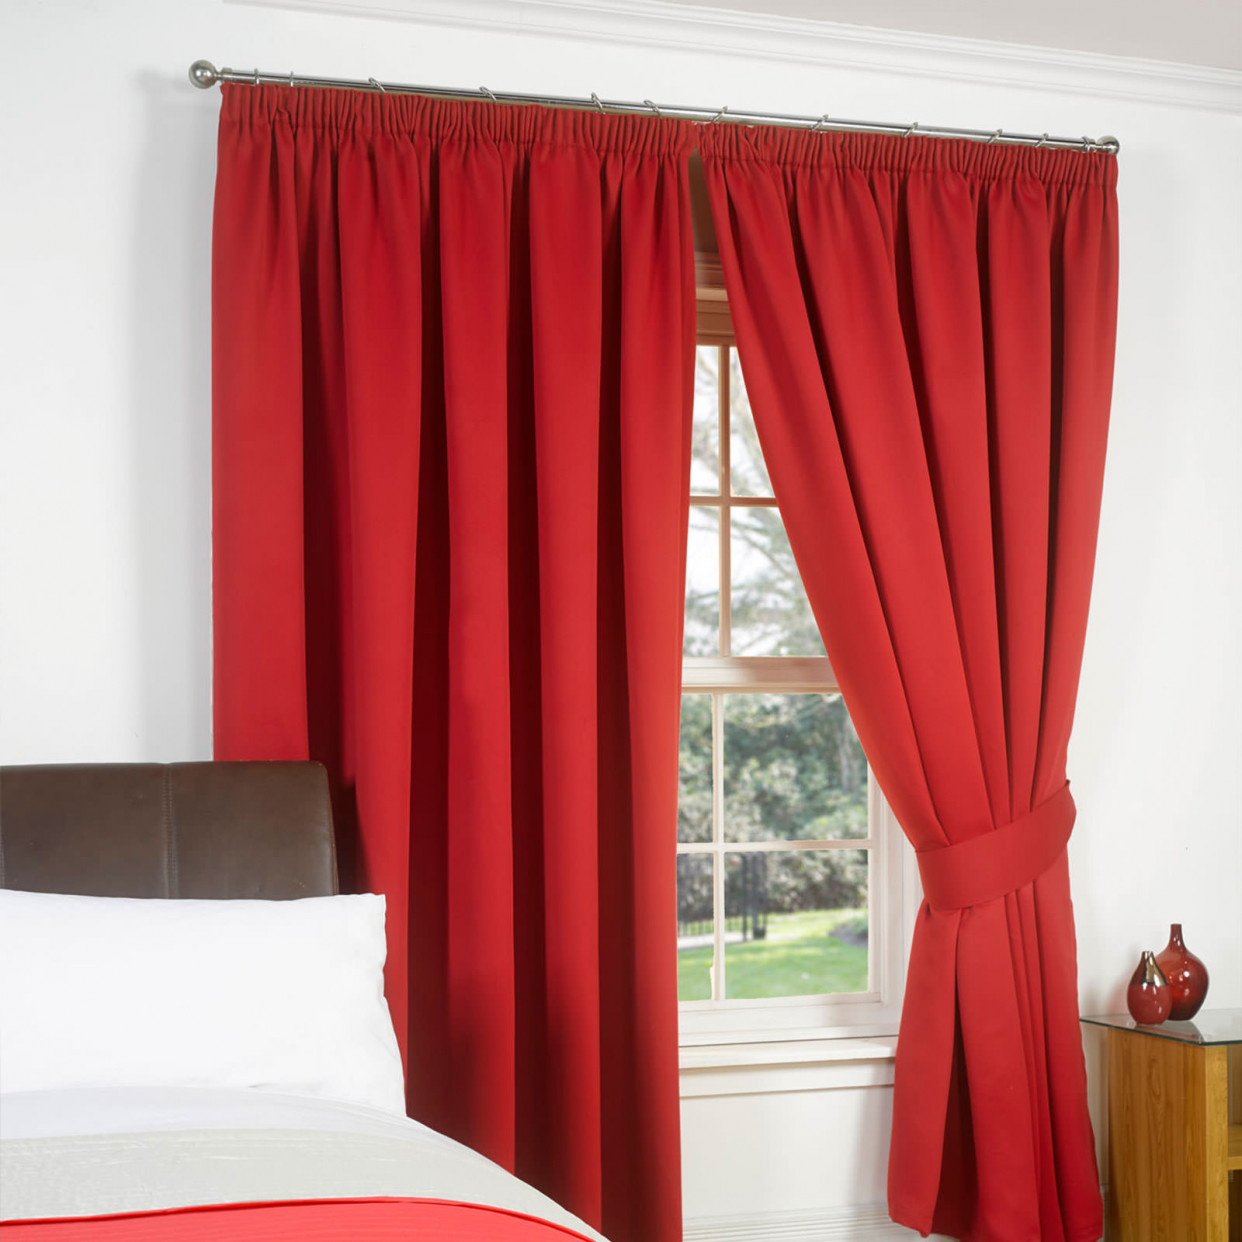 Pencil Pleat Thermal Blackout Curtains - Red 46x54>